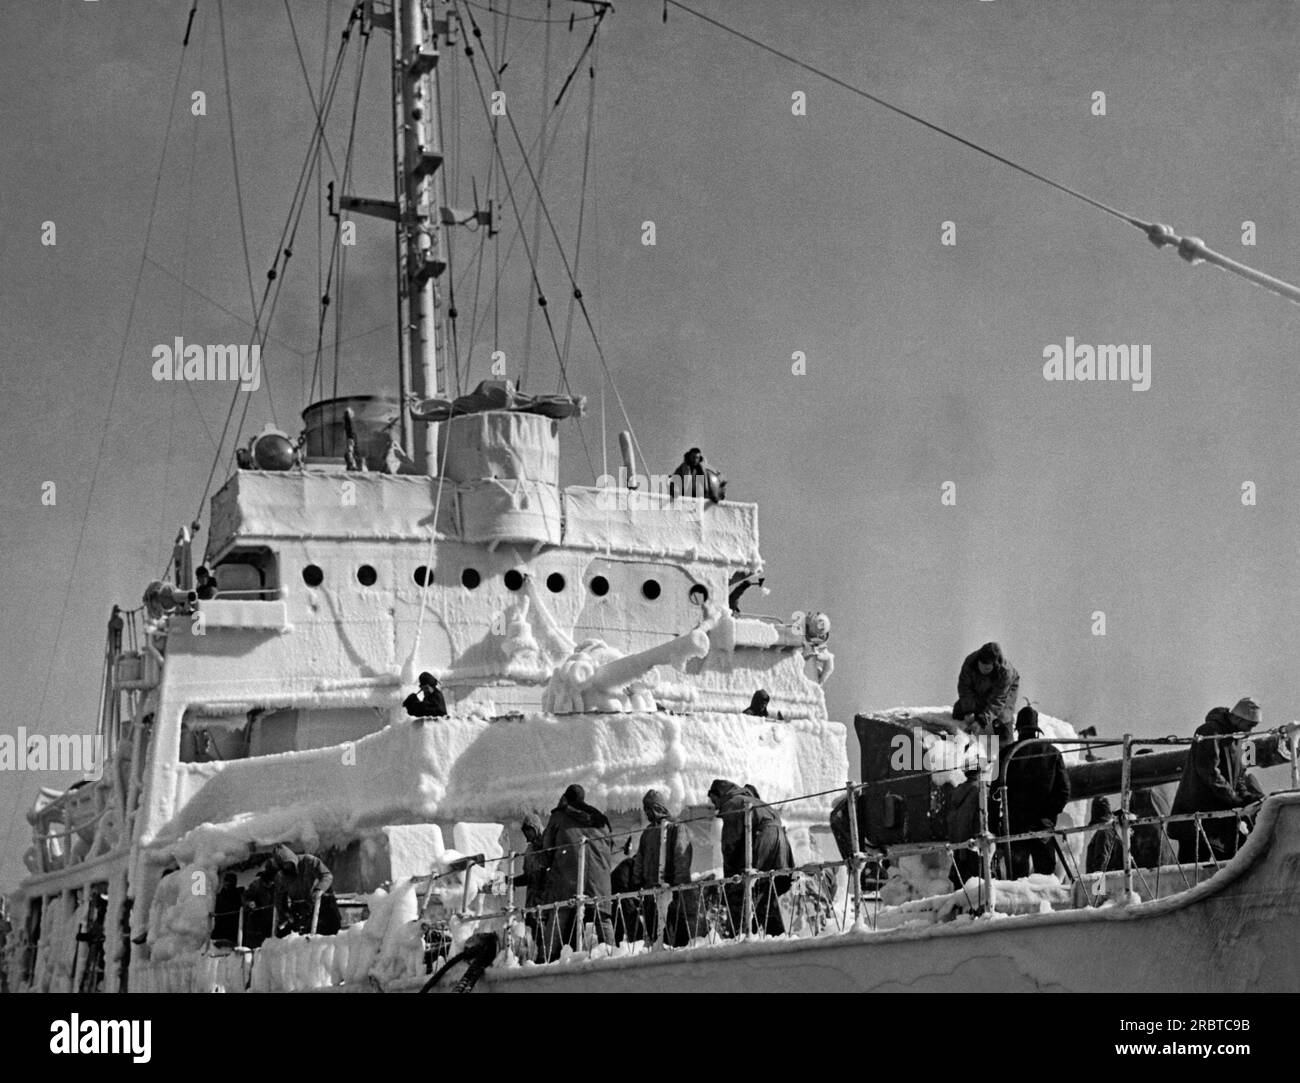 Atlantic Ocean, circa 1944 A Coast Guard ship in the North Atlantic showing the extreme ice and cold condtions they must deal with. Stock Photo